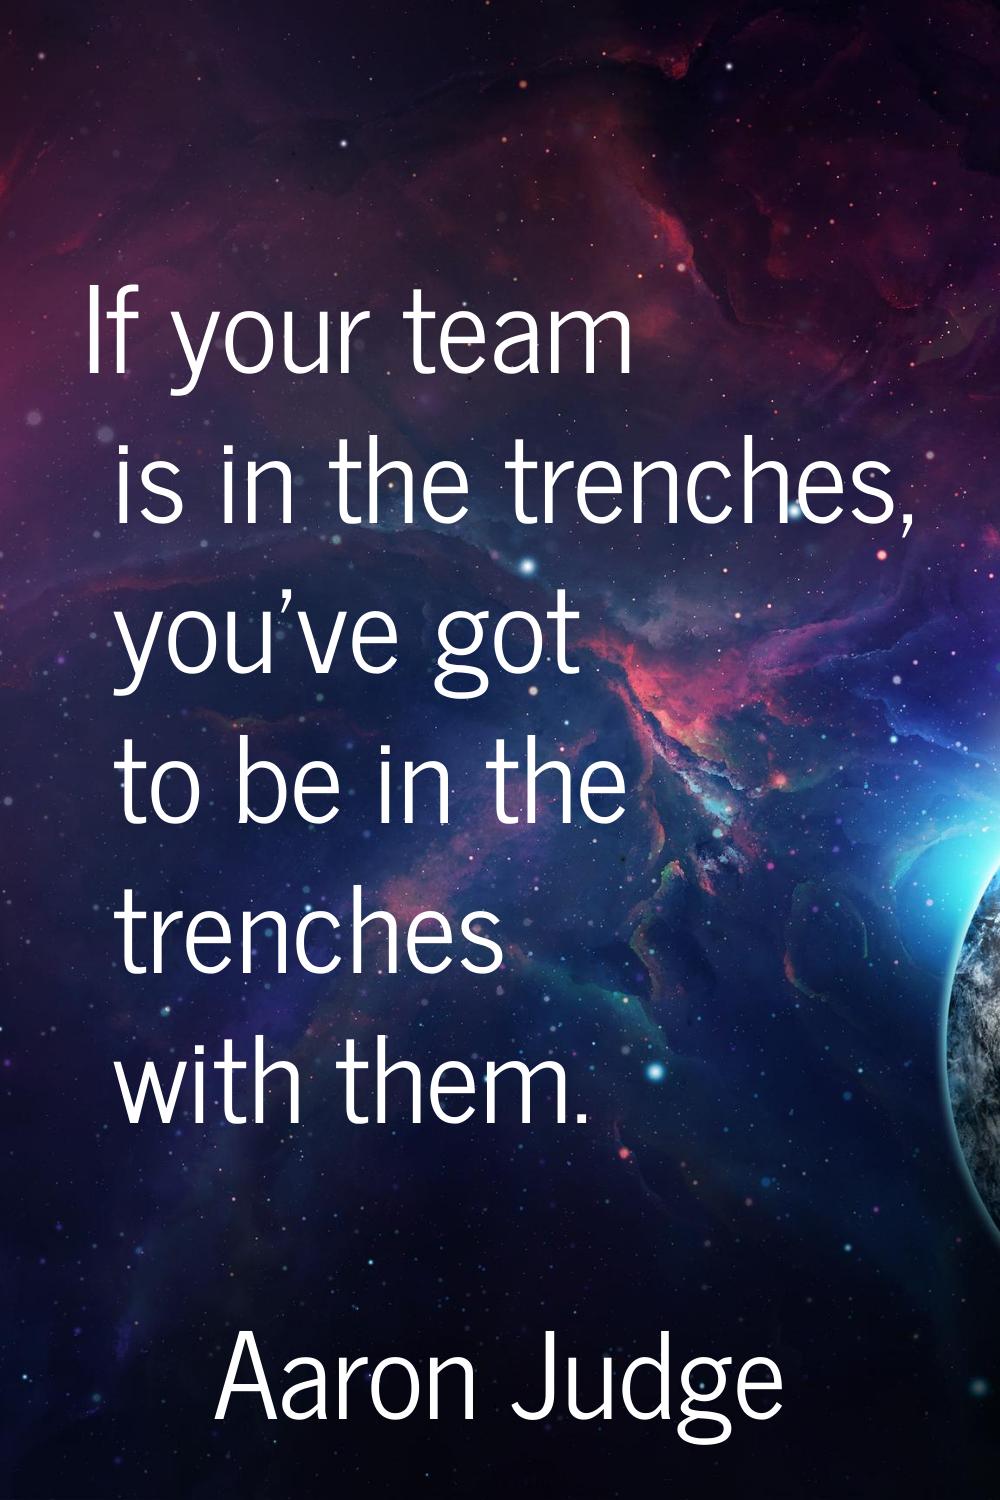 If your team is in the trenches, you've got to be in the trenches with them.